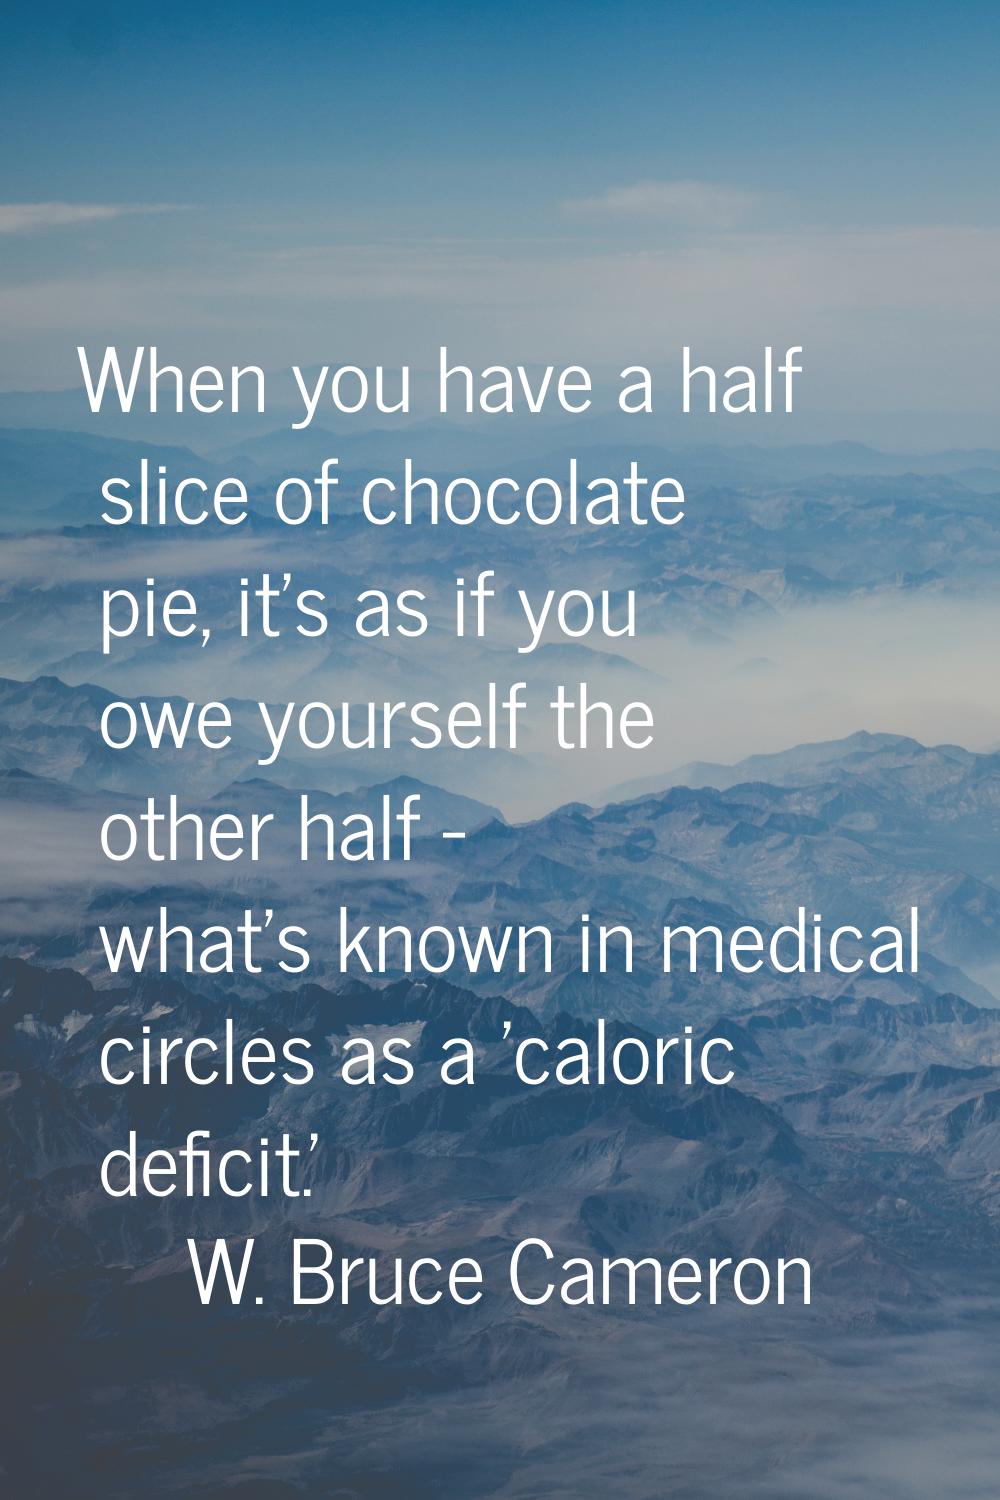 When you have a half slice of chocolate pie, it's as if you owe yourself the other half - what's kn